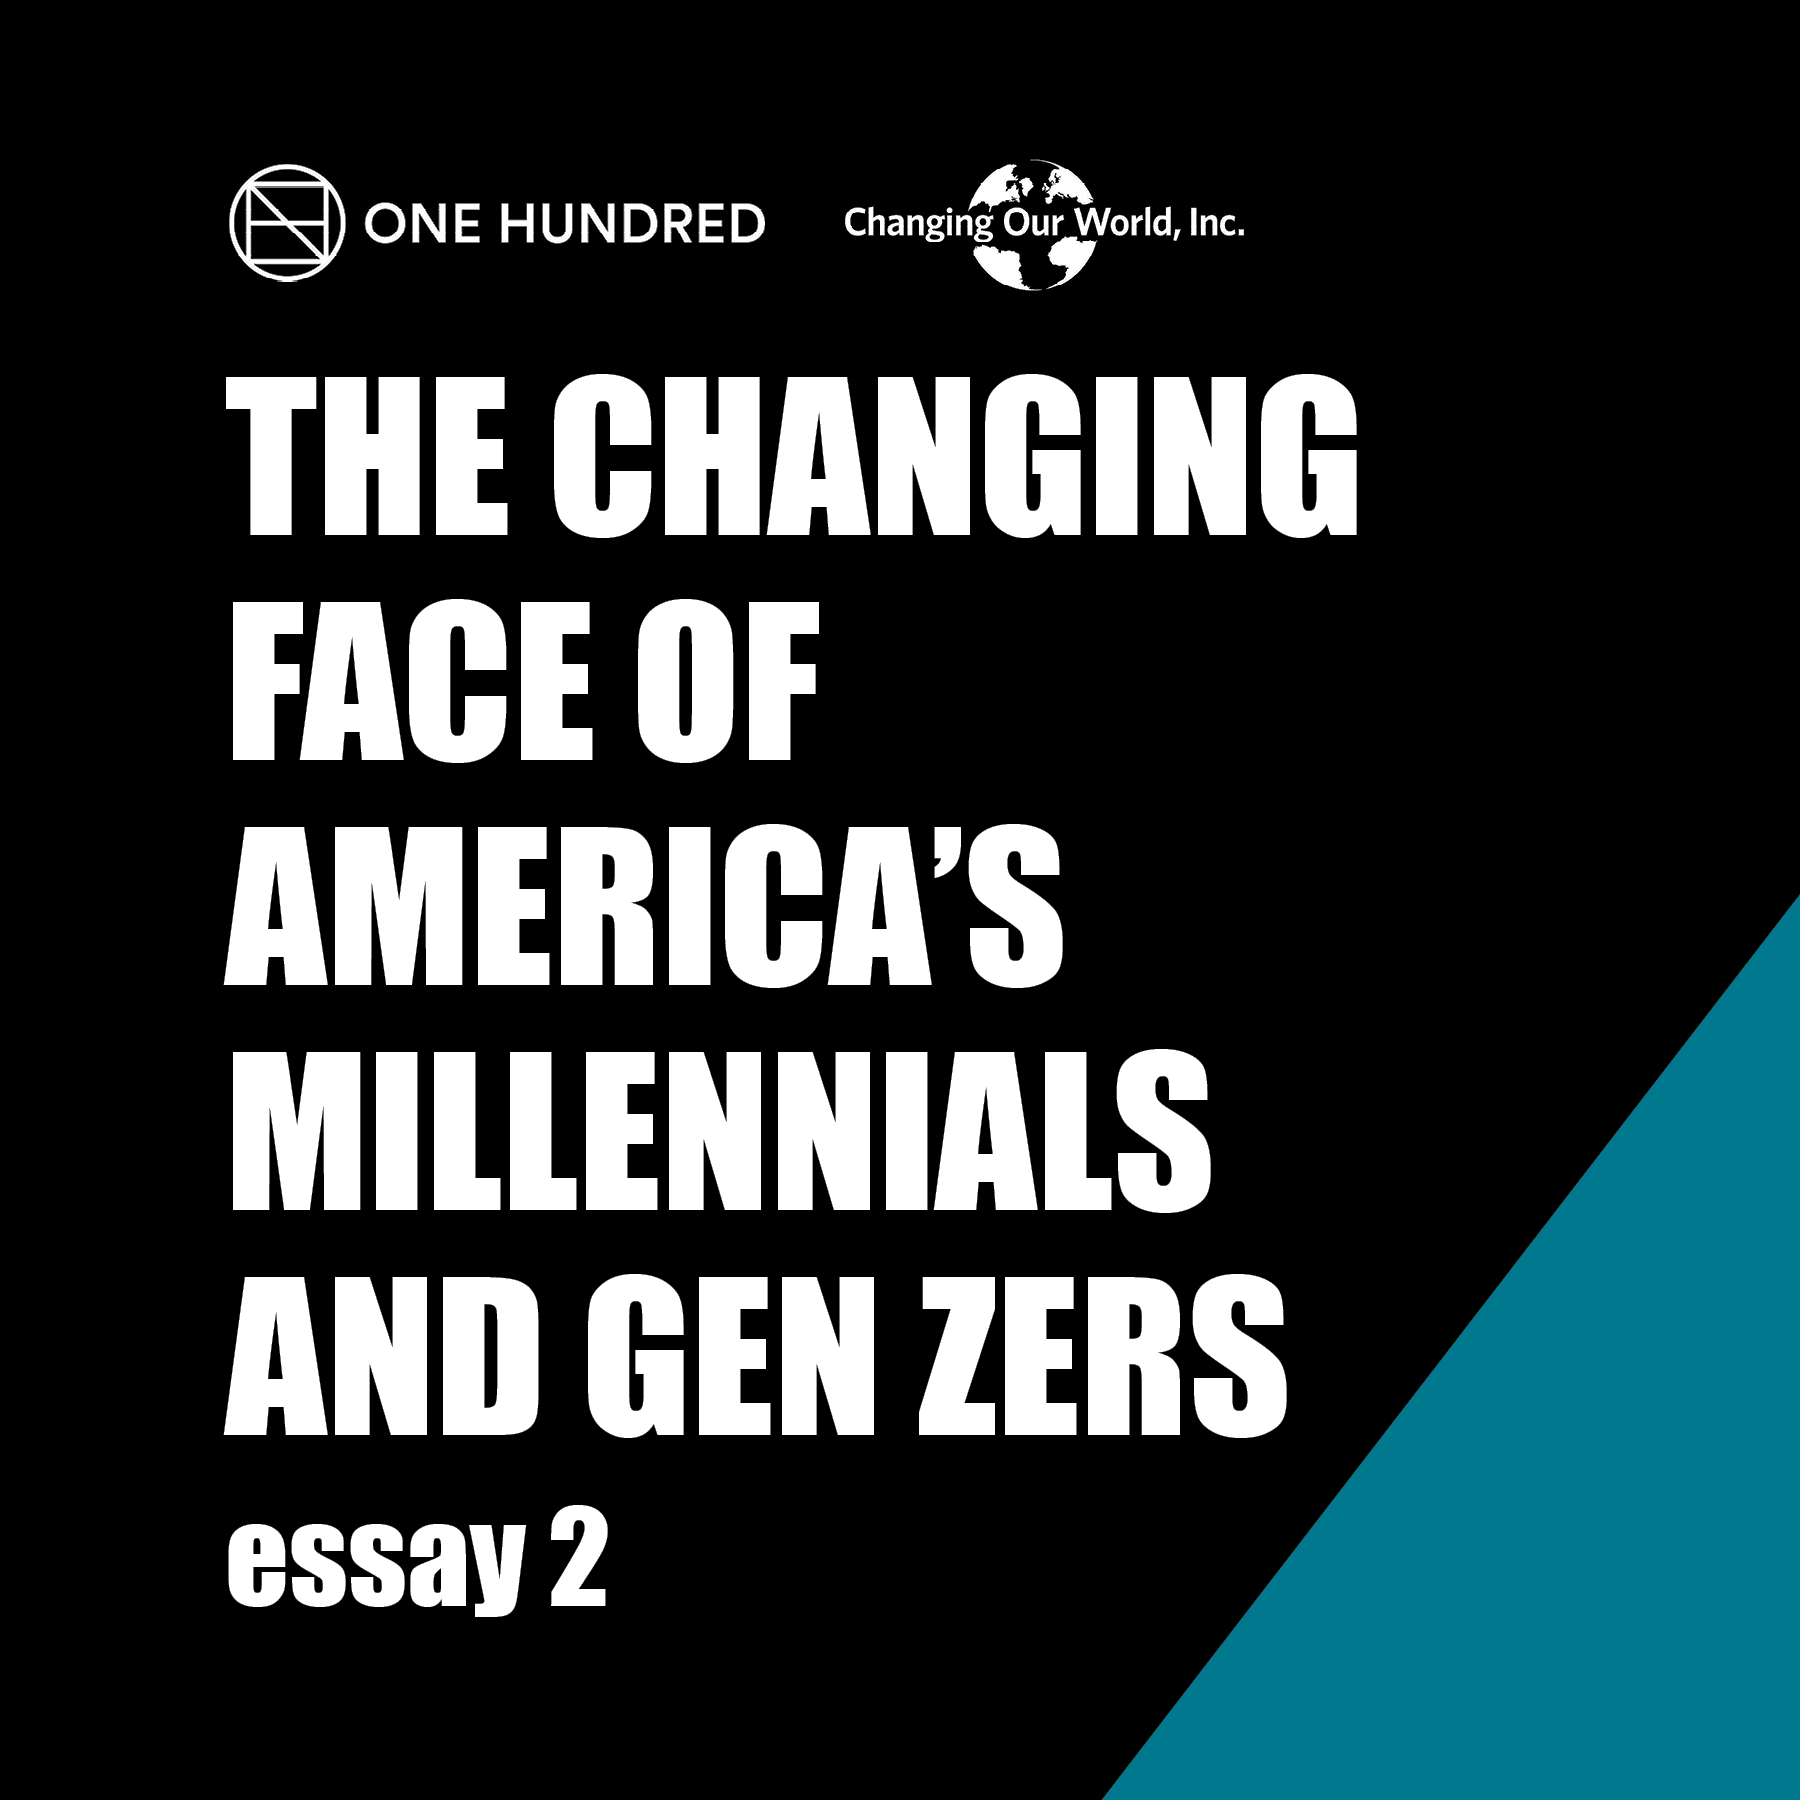 The changing face of america's millenials and gen zers essay 2.